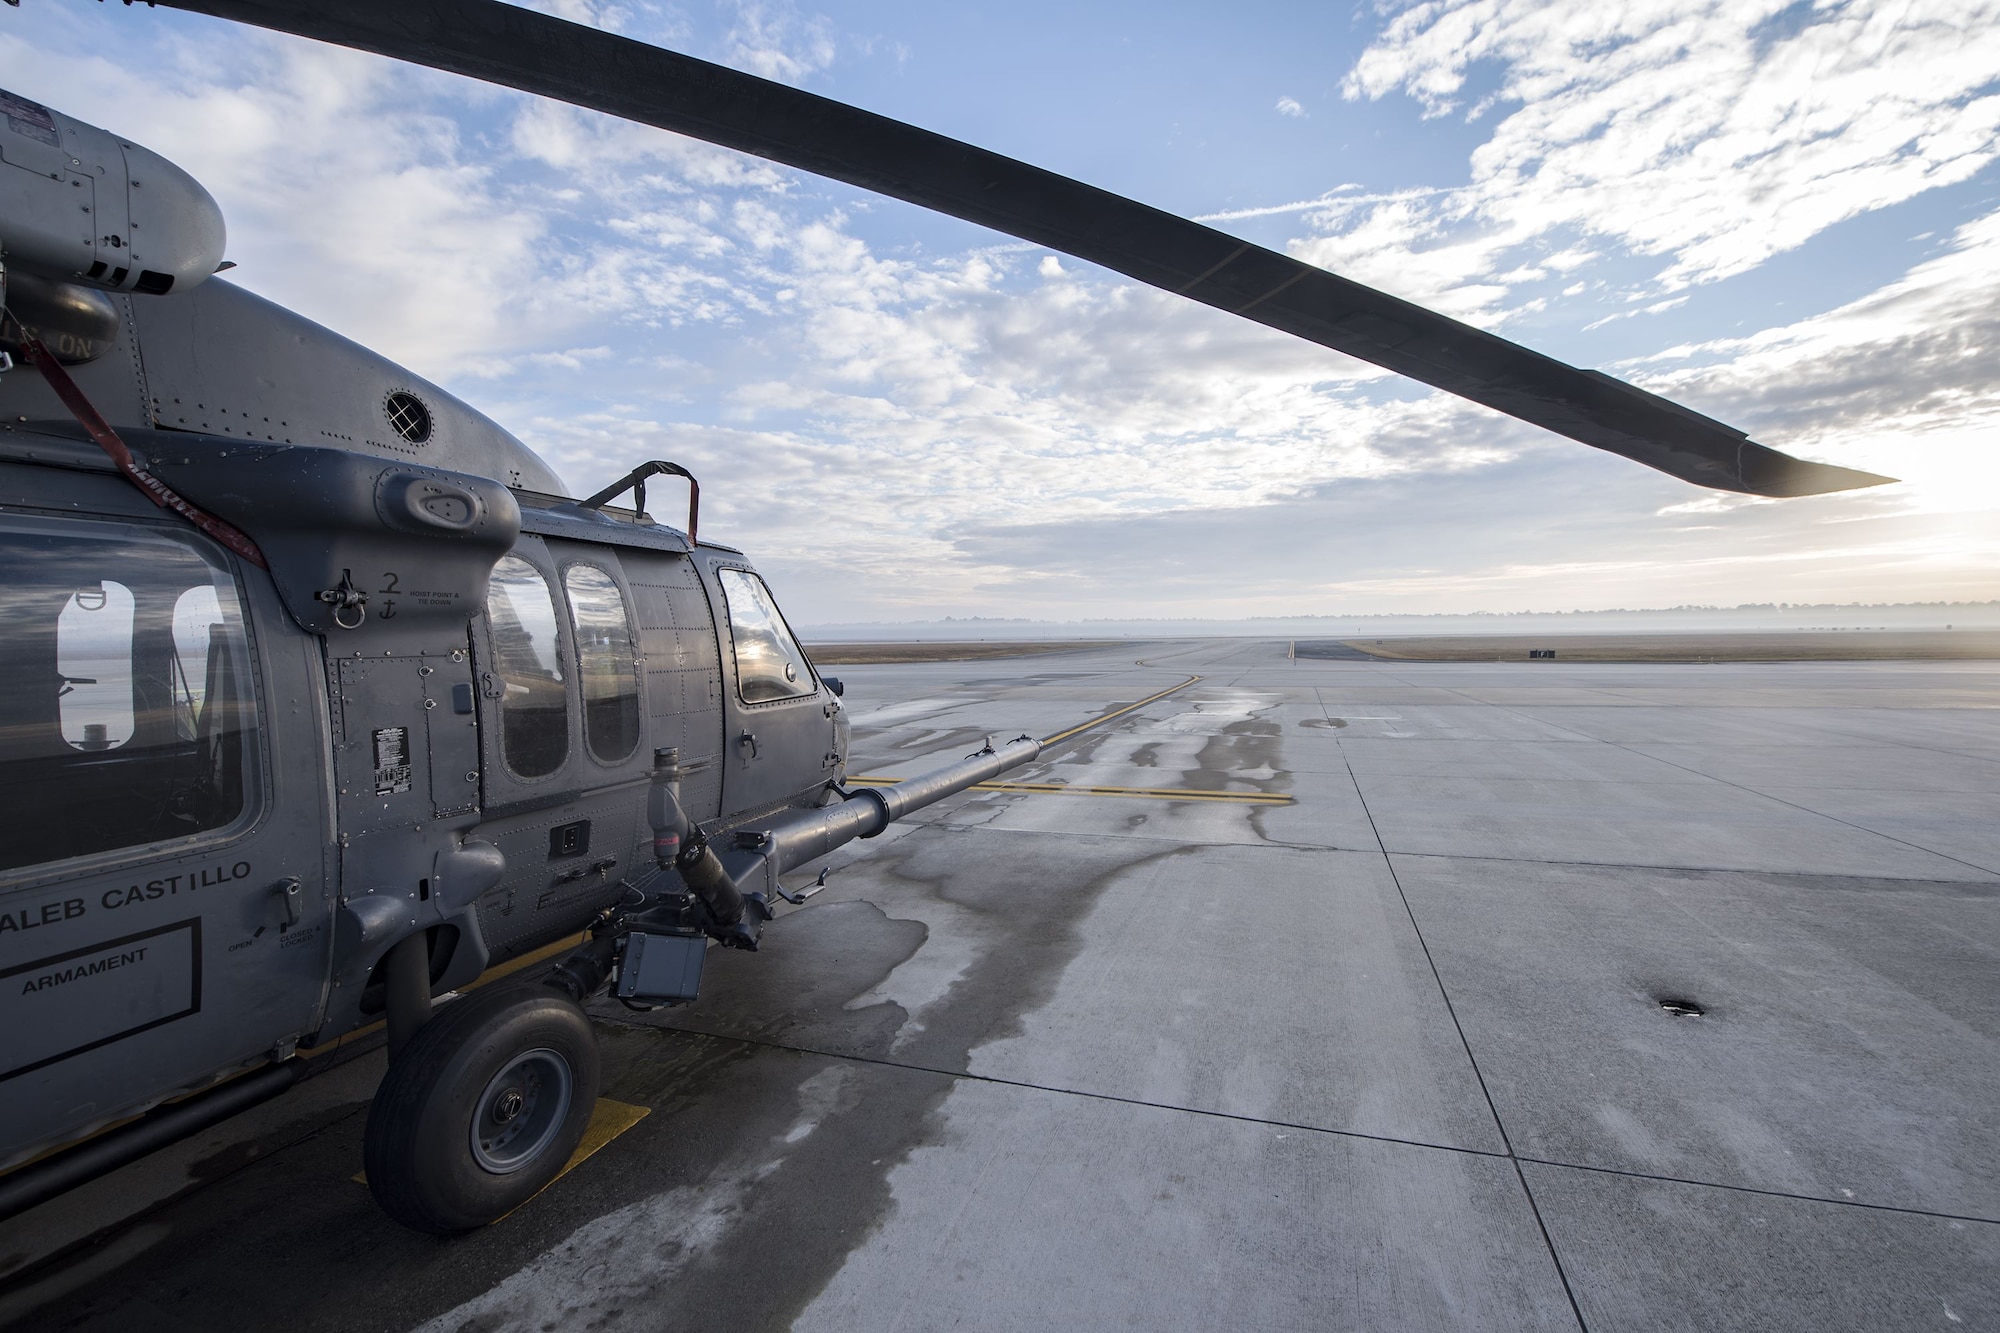 An HH-60G Pave Hawk rests on the flight line, Dec. 15, 2017, at Moody Air Force Base, Ga. Members from the 723d Aircraft Maintenance Squadron (AMXS) and 23d Civil Engineer Squadron (CES) participated in a training day to help improve their readiness and get extra practice at their crafts. The AMXS performed maintenance on helicopters and the CES conducted rescue operations by extinguishing a mock fire within an HH-60G Pave Hawk and extracting injured victims. (U.S. Air Force photo by Airman Eugene Oliver)